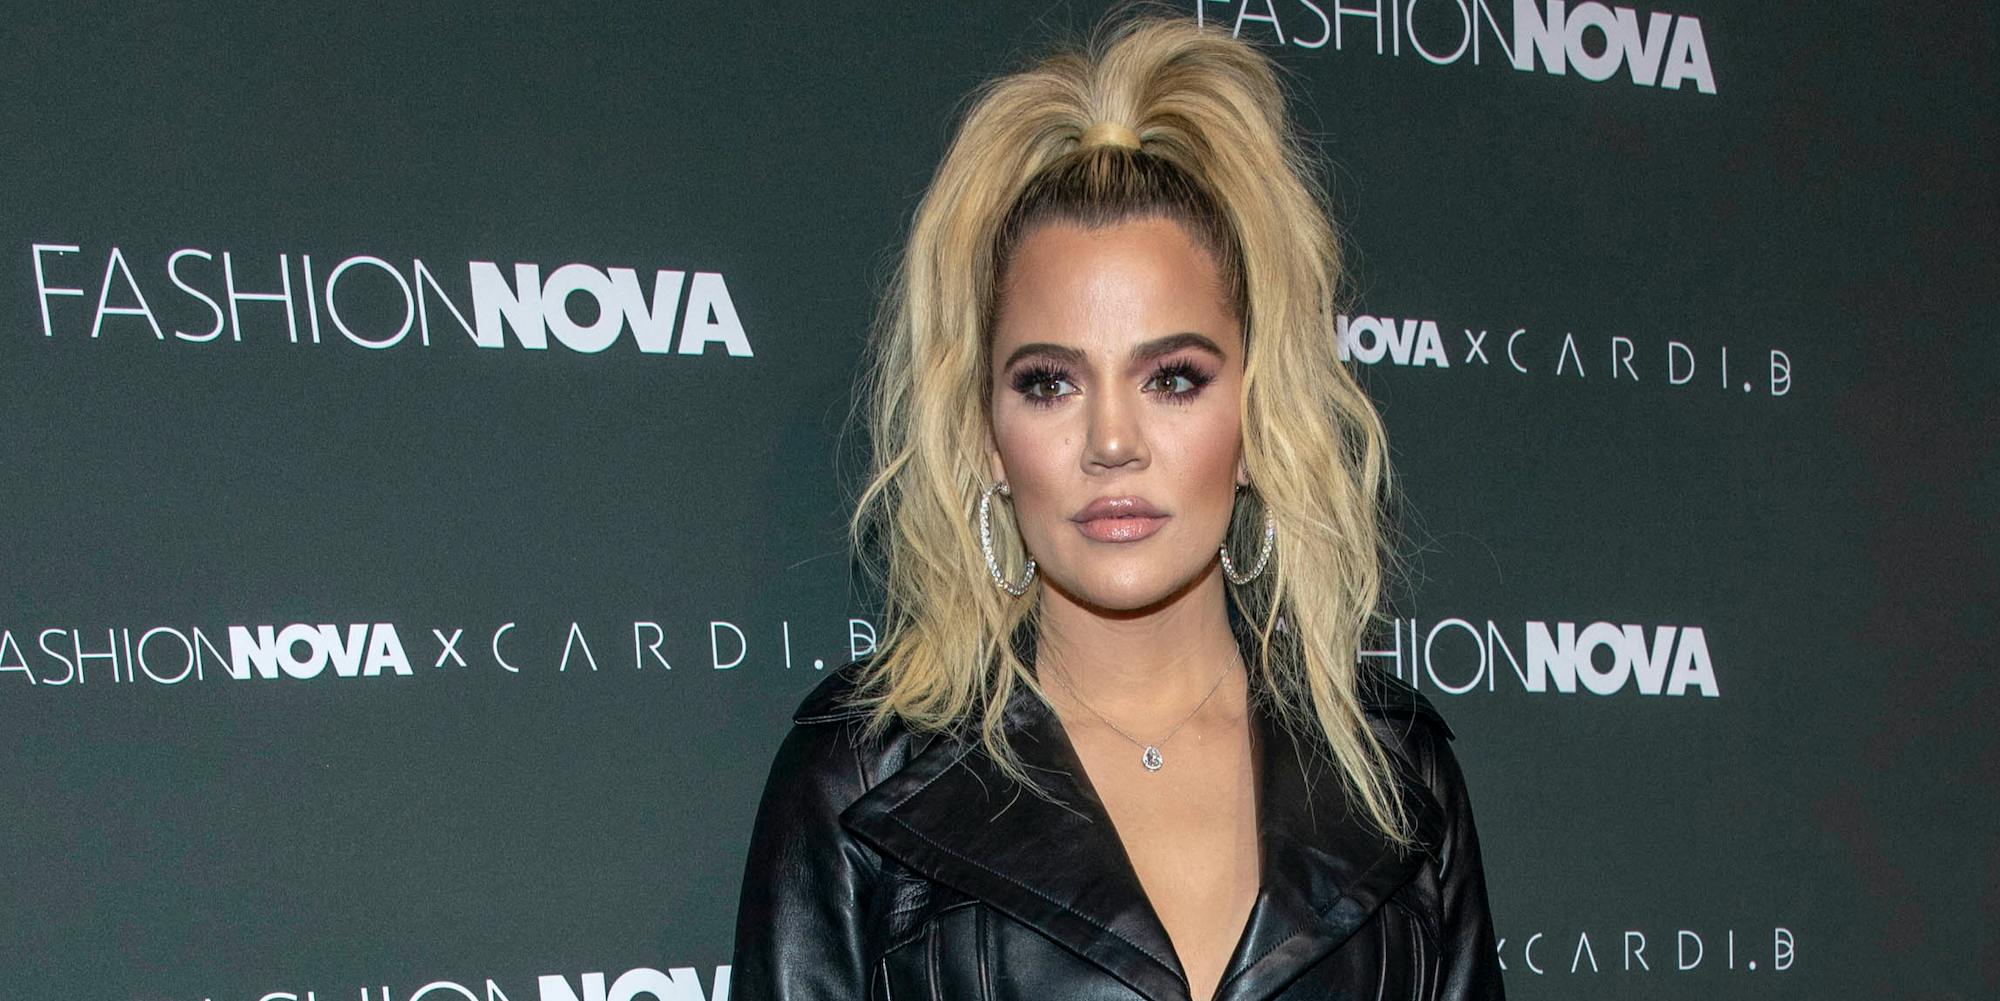 Khloé Kardashian S Team Is Trying To Get An Unapproved Photo Scrubbed